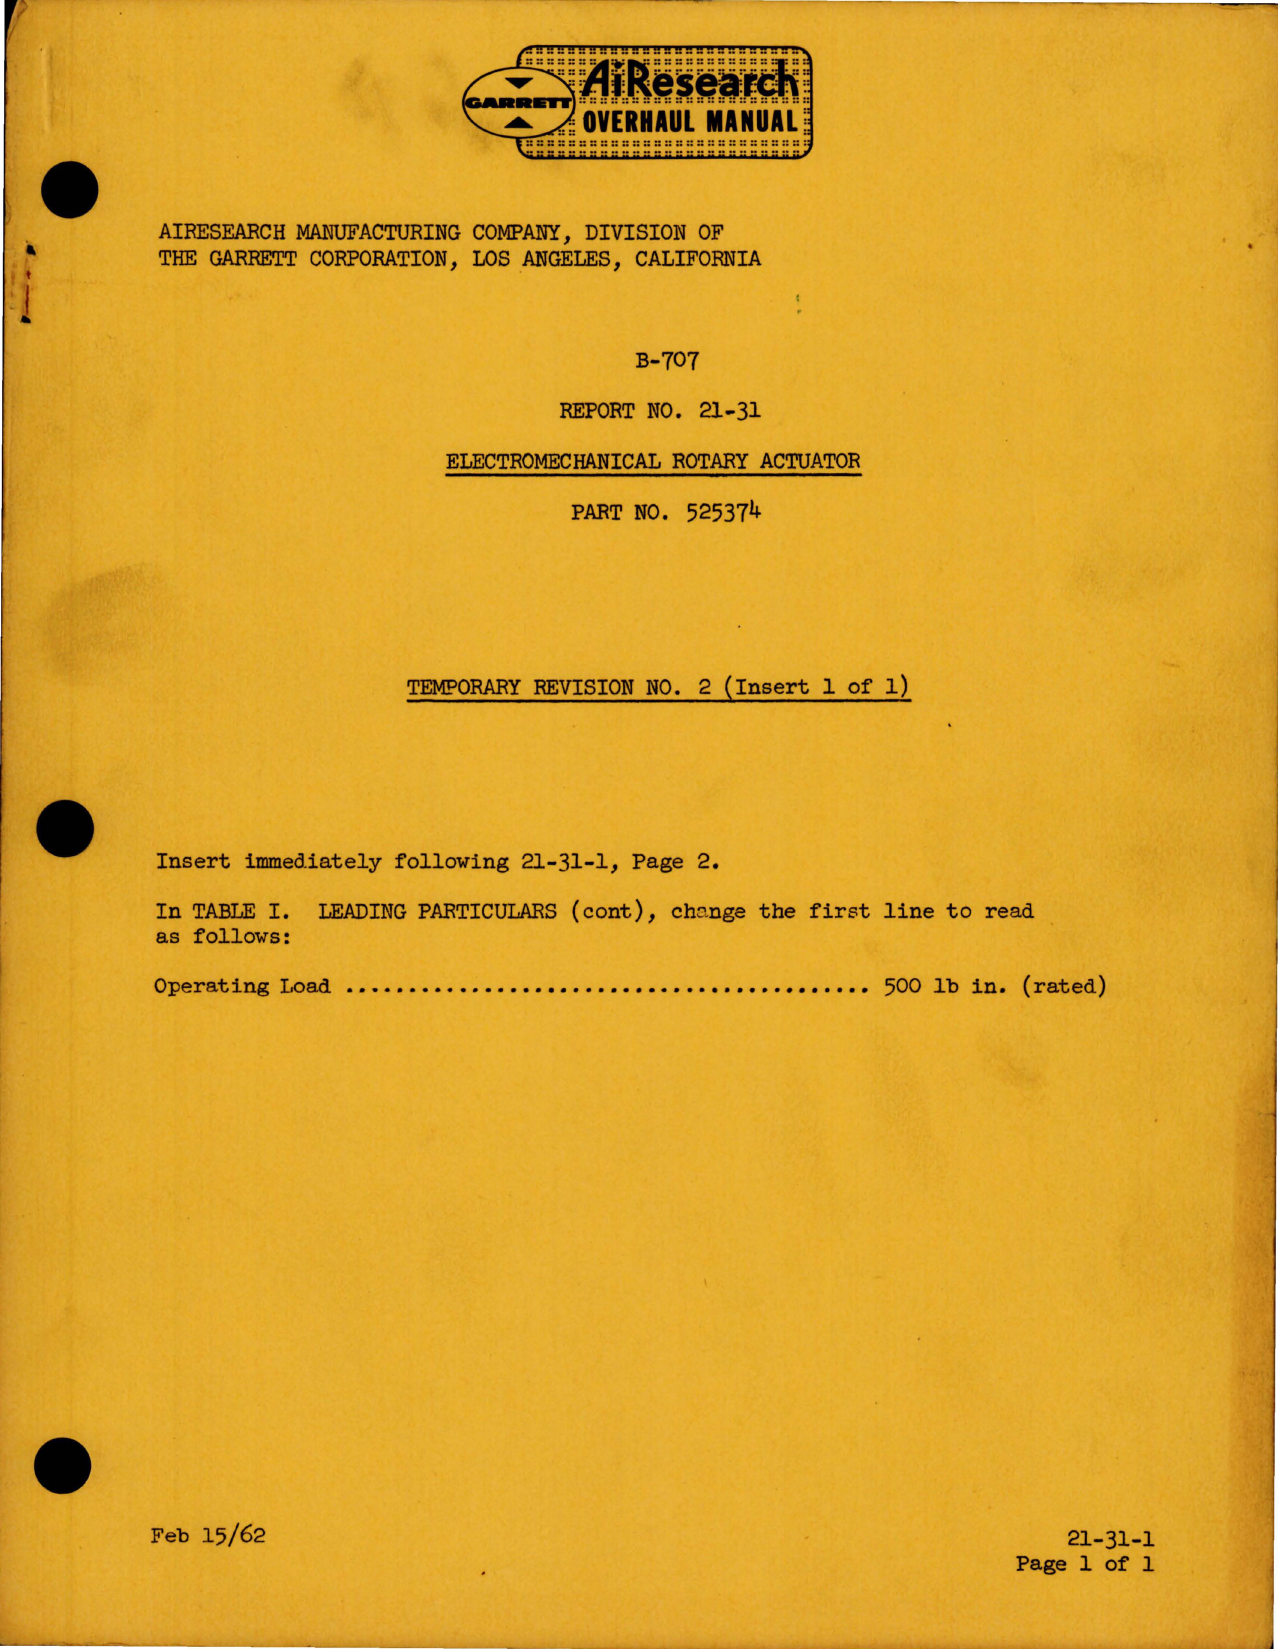 Sample page 1 from AirCorps Library document: Electromechanical Rotary Actuator - Part 525374 - Revision No. 2 